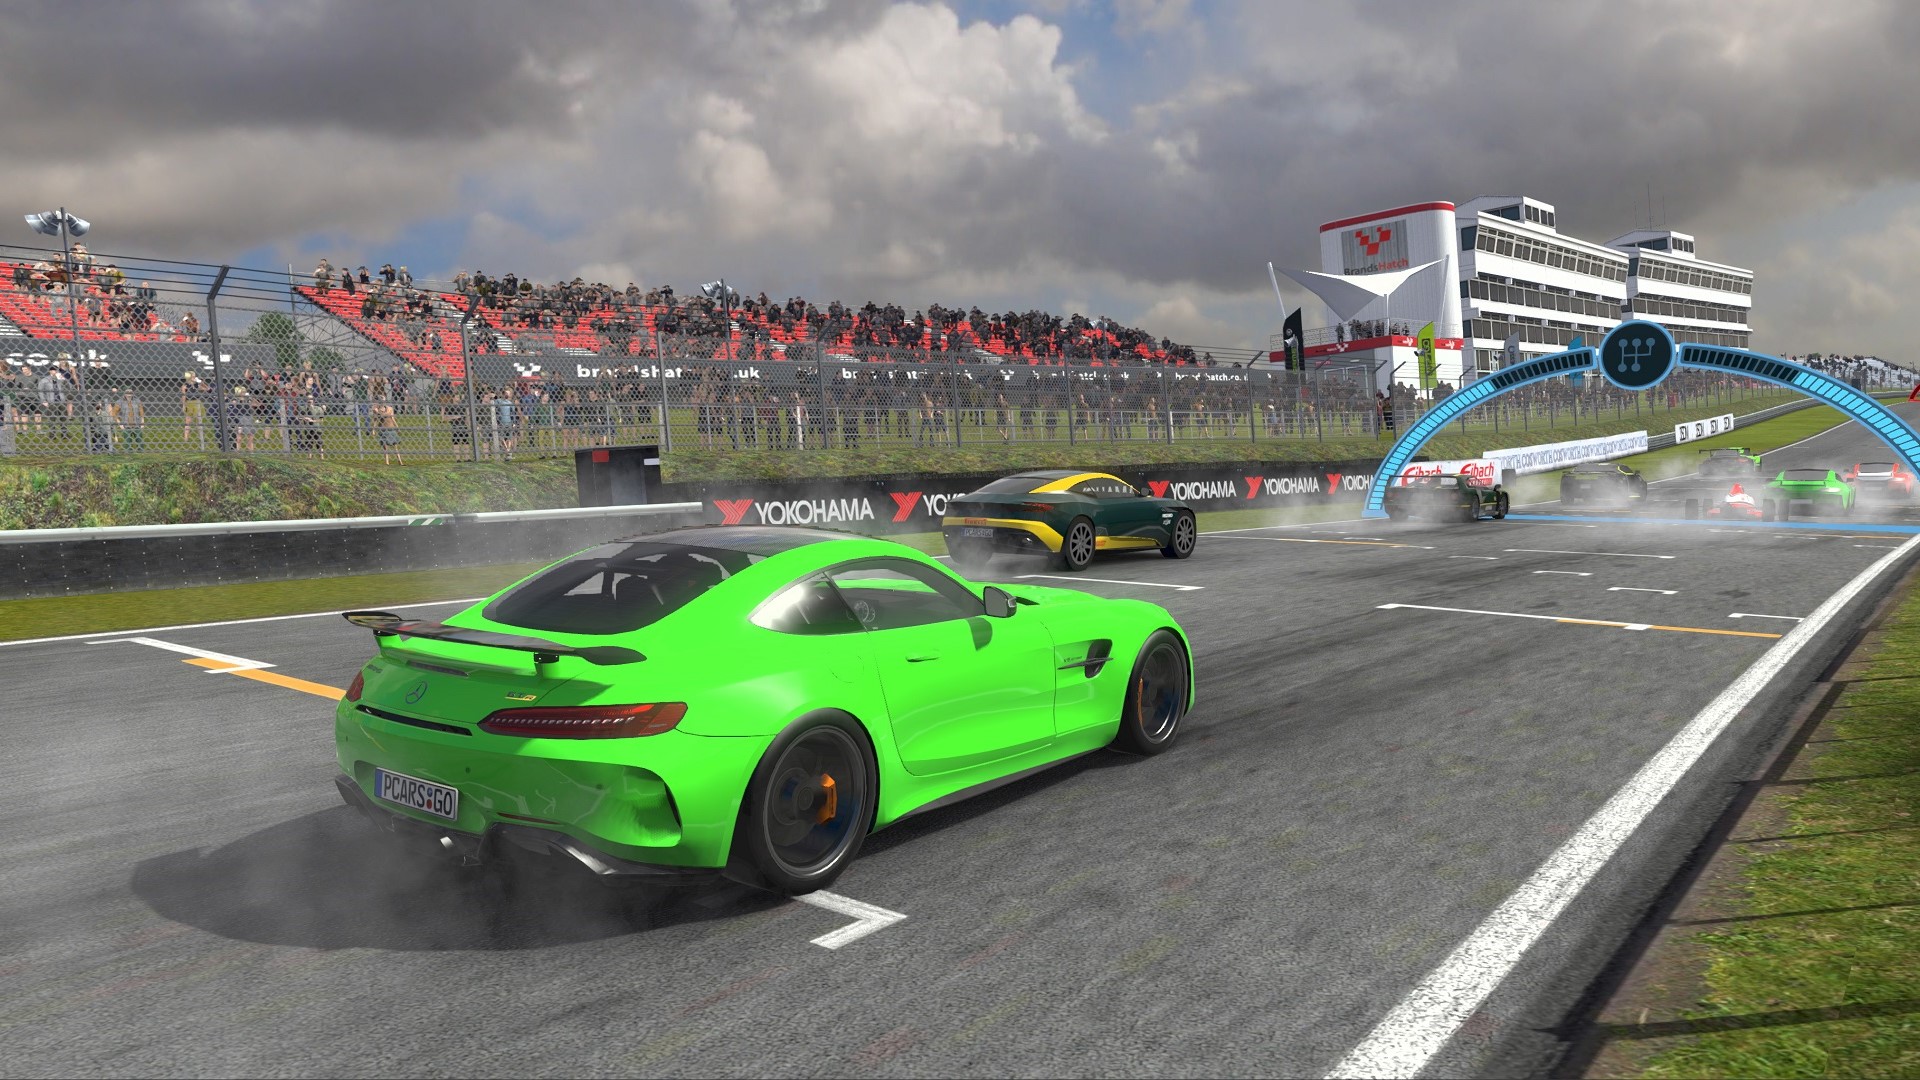 Project Cars 2 for Xbox One review: Can Slightly Mad Studios hope to take  on Forza?